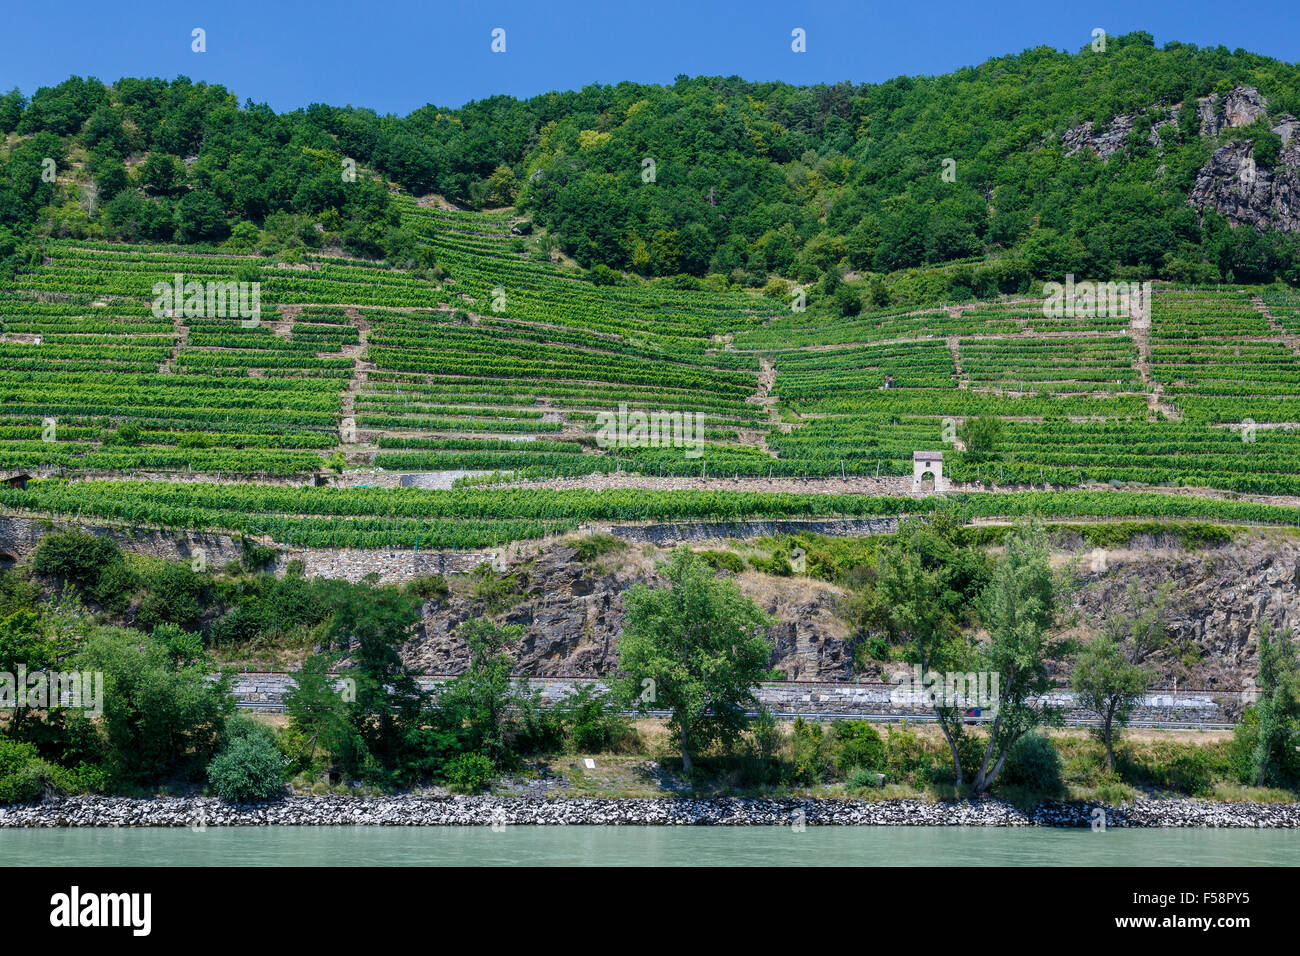 The world famous terraced vineyards alongside the Danube River in the Wachau Valley, Lower Austria. Stock Photo